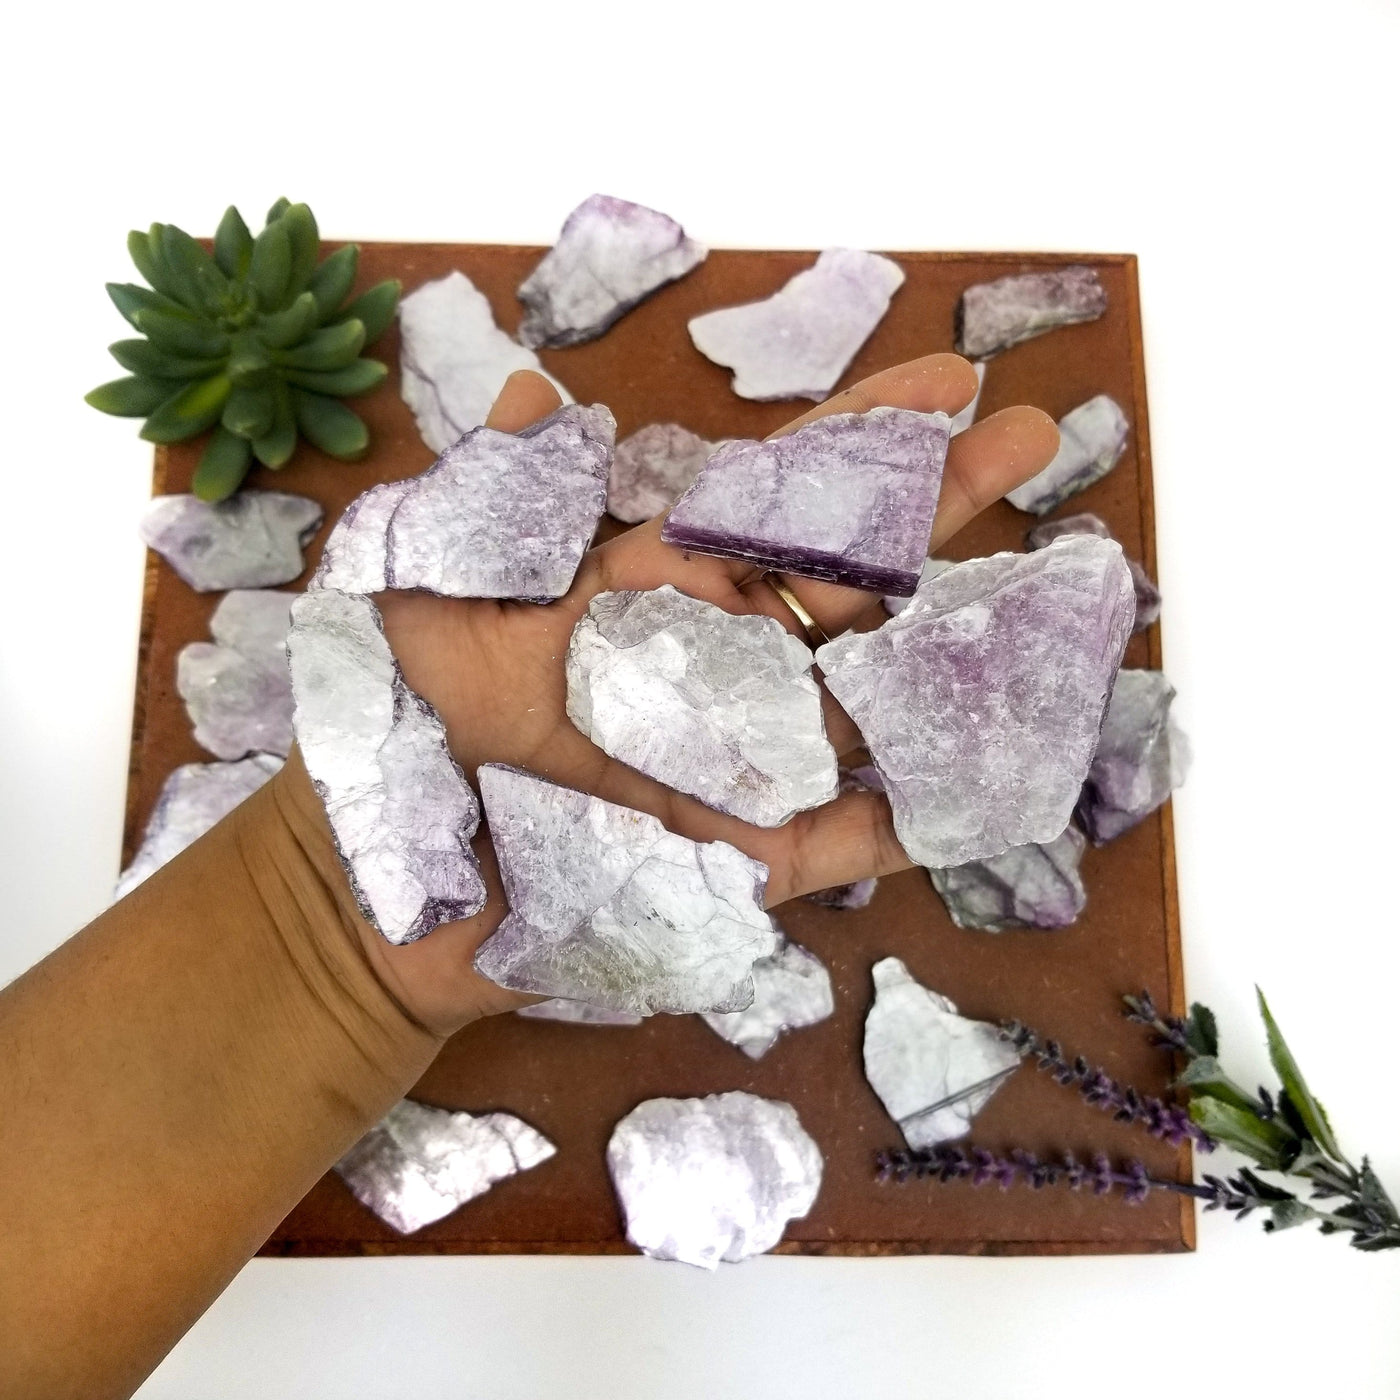 hand holding up 5 lepidolite slices with others blurred in the background on brown platter